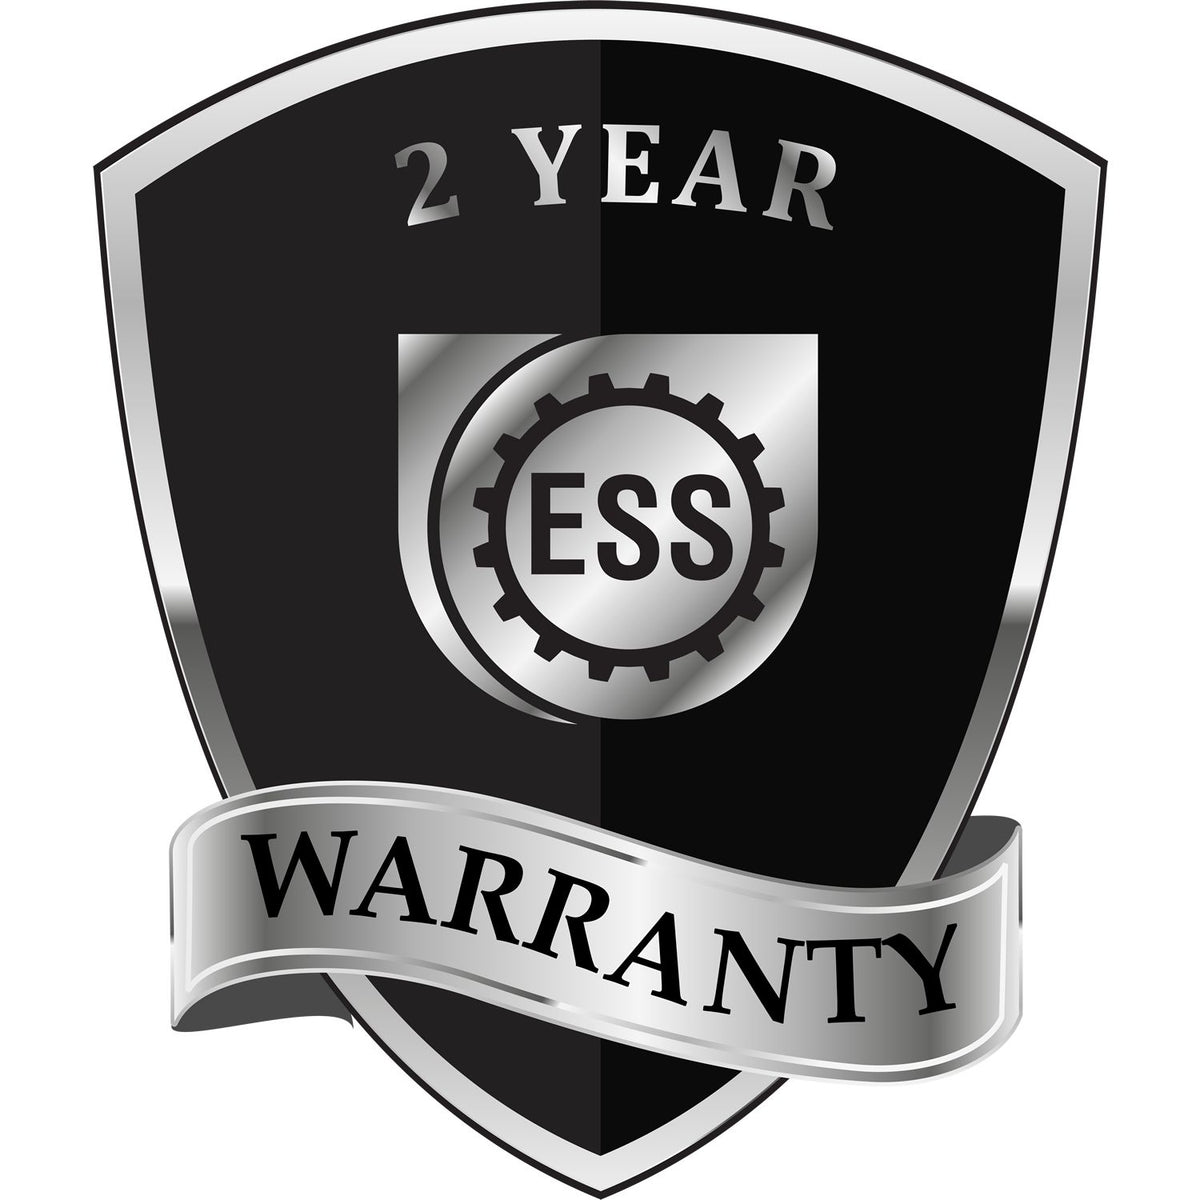 A badge or emblem showing a warranty icon for the Long Reach Iowa Land Surveyor Seal